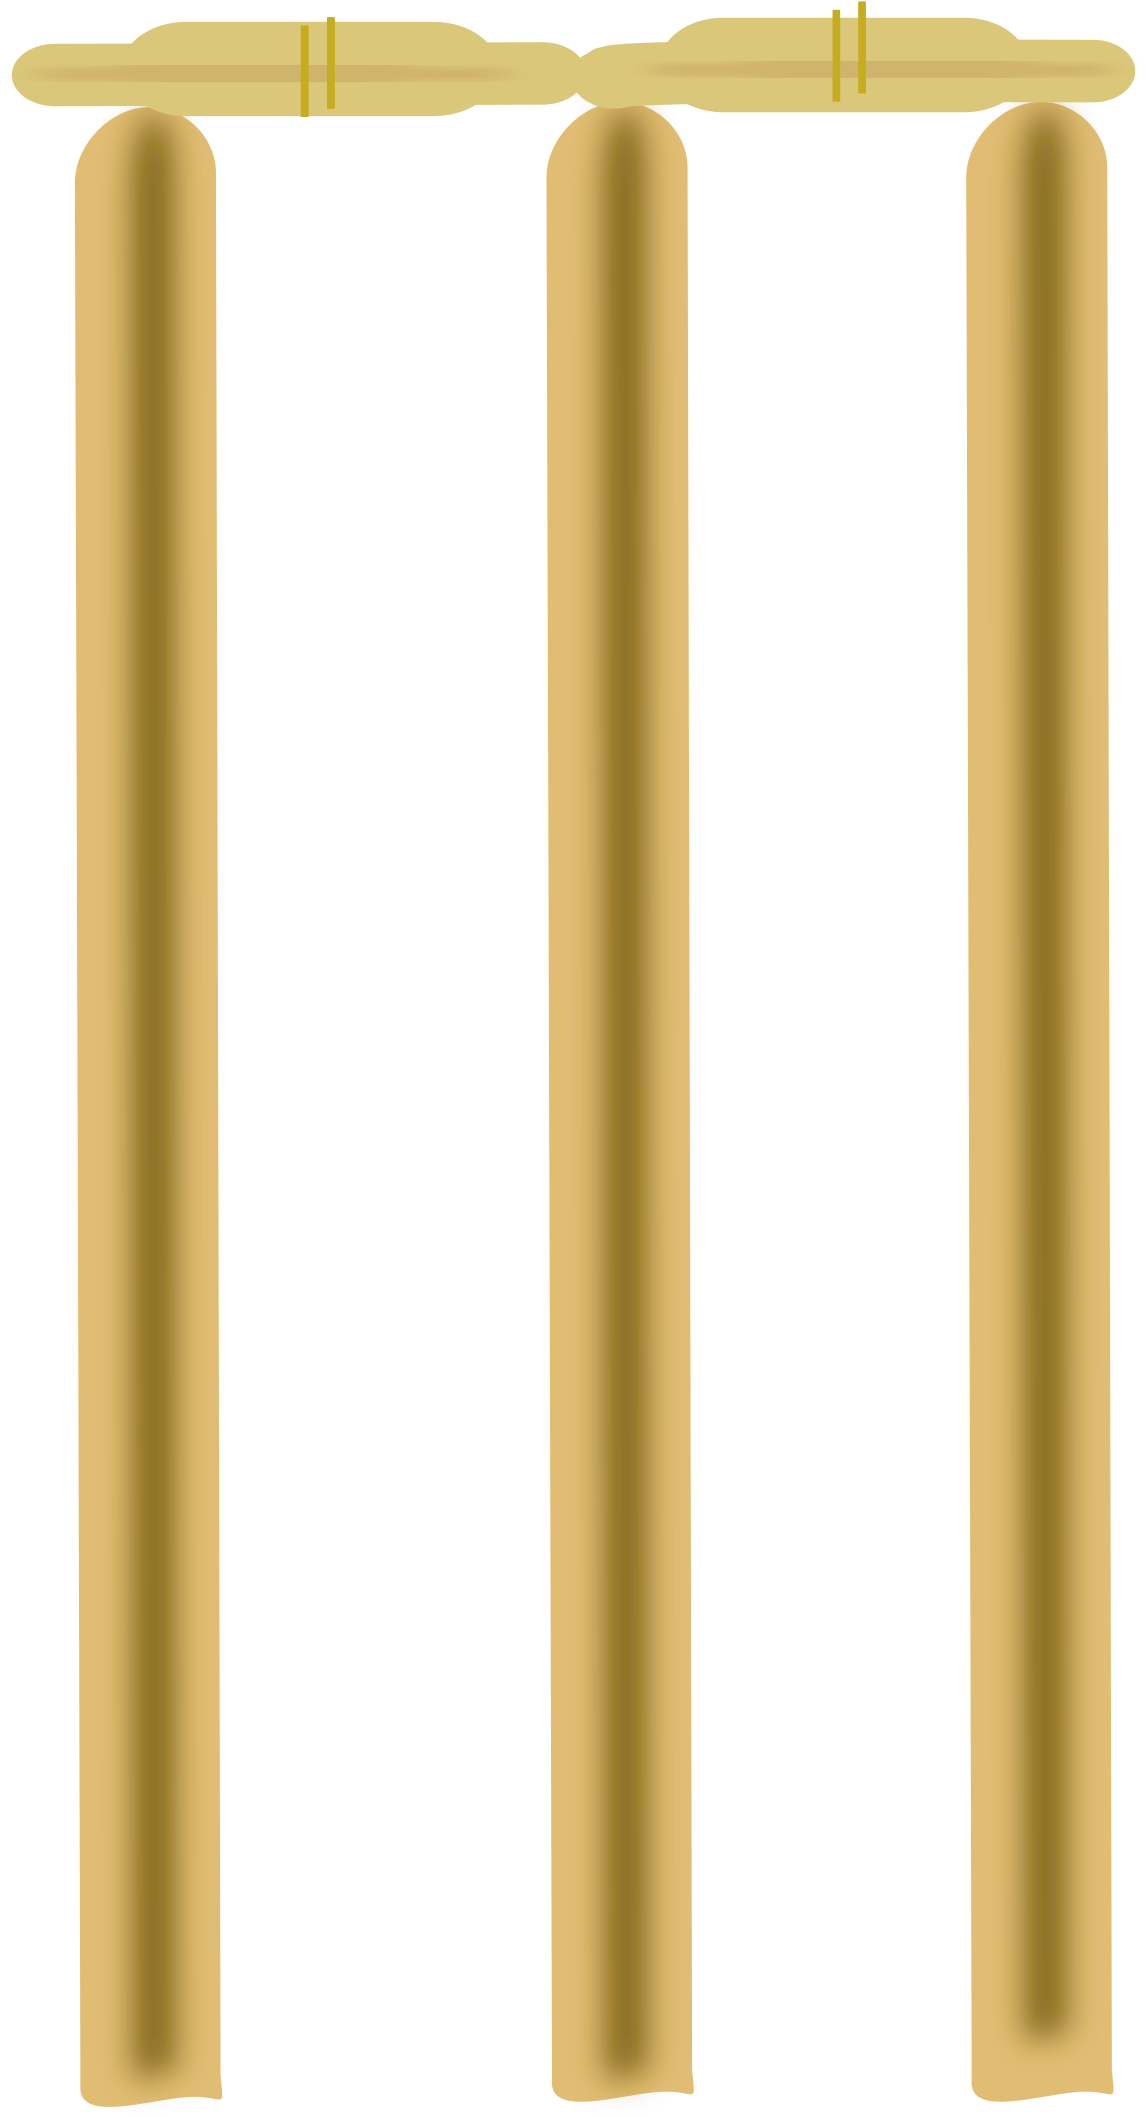 A Row Of Bars On A Black Background